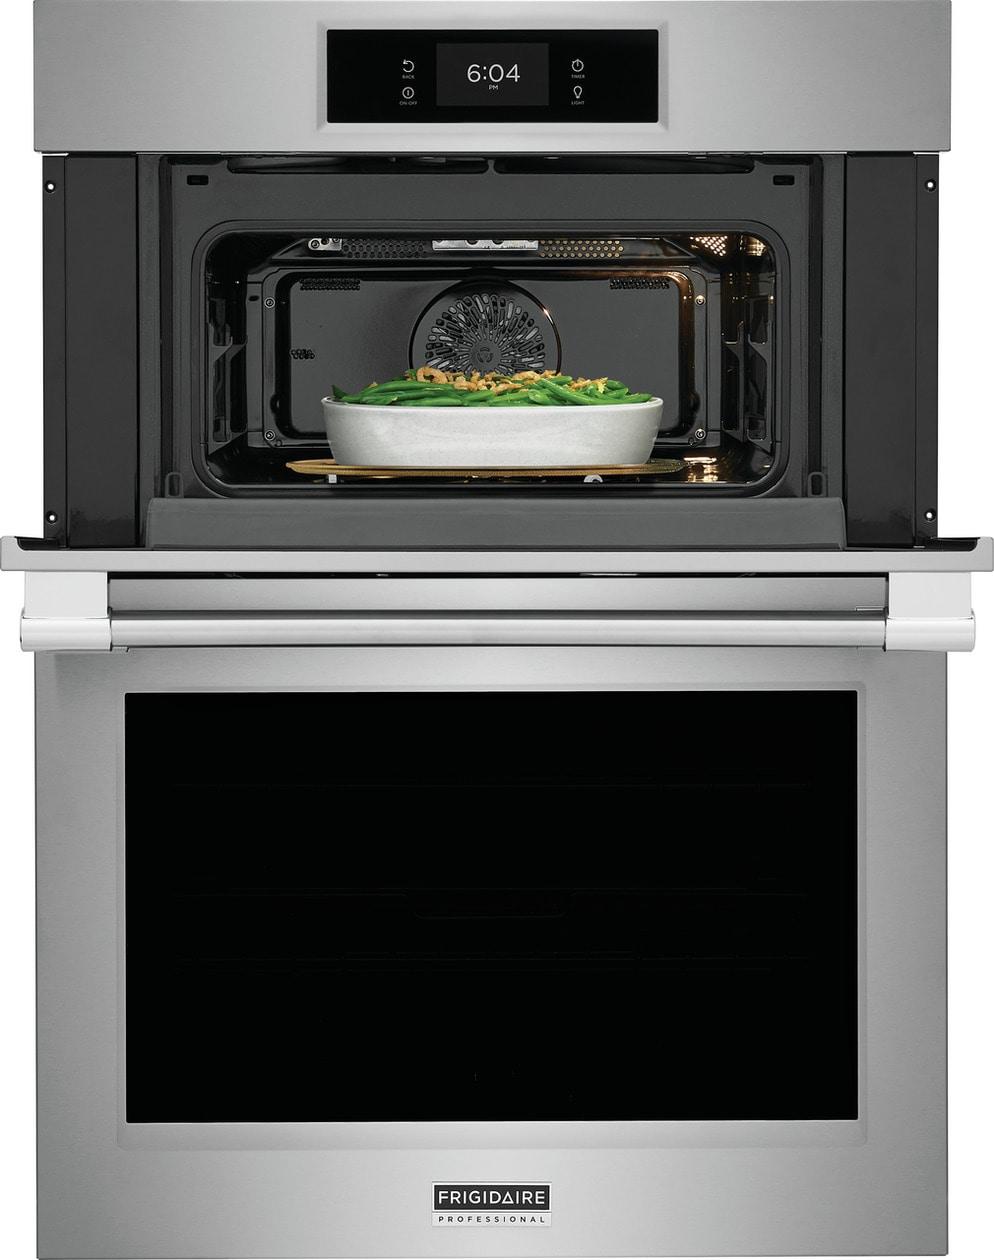 Frigidaire PCWM3080AF Frigidaire Professional 30" Electric Wall Oven And Microwave Combination With Total Convection